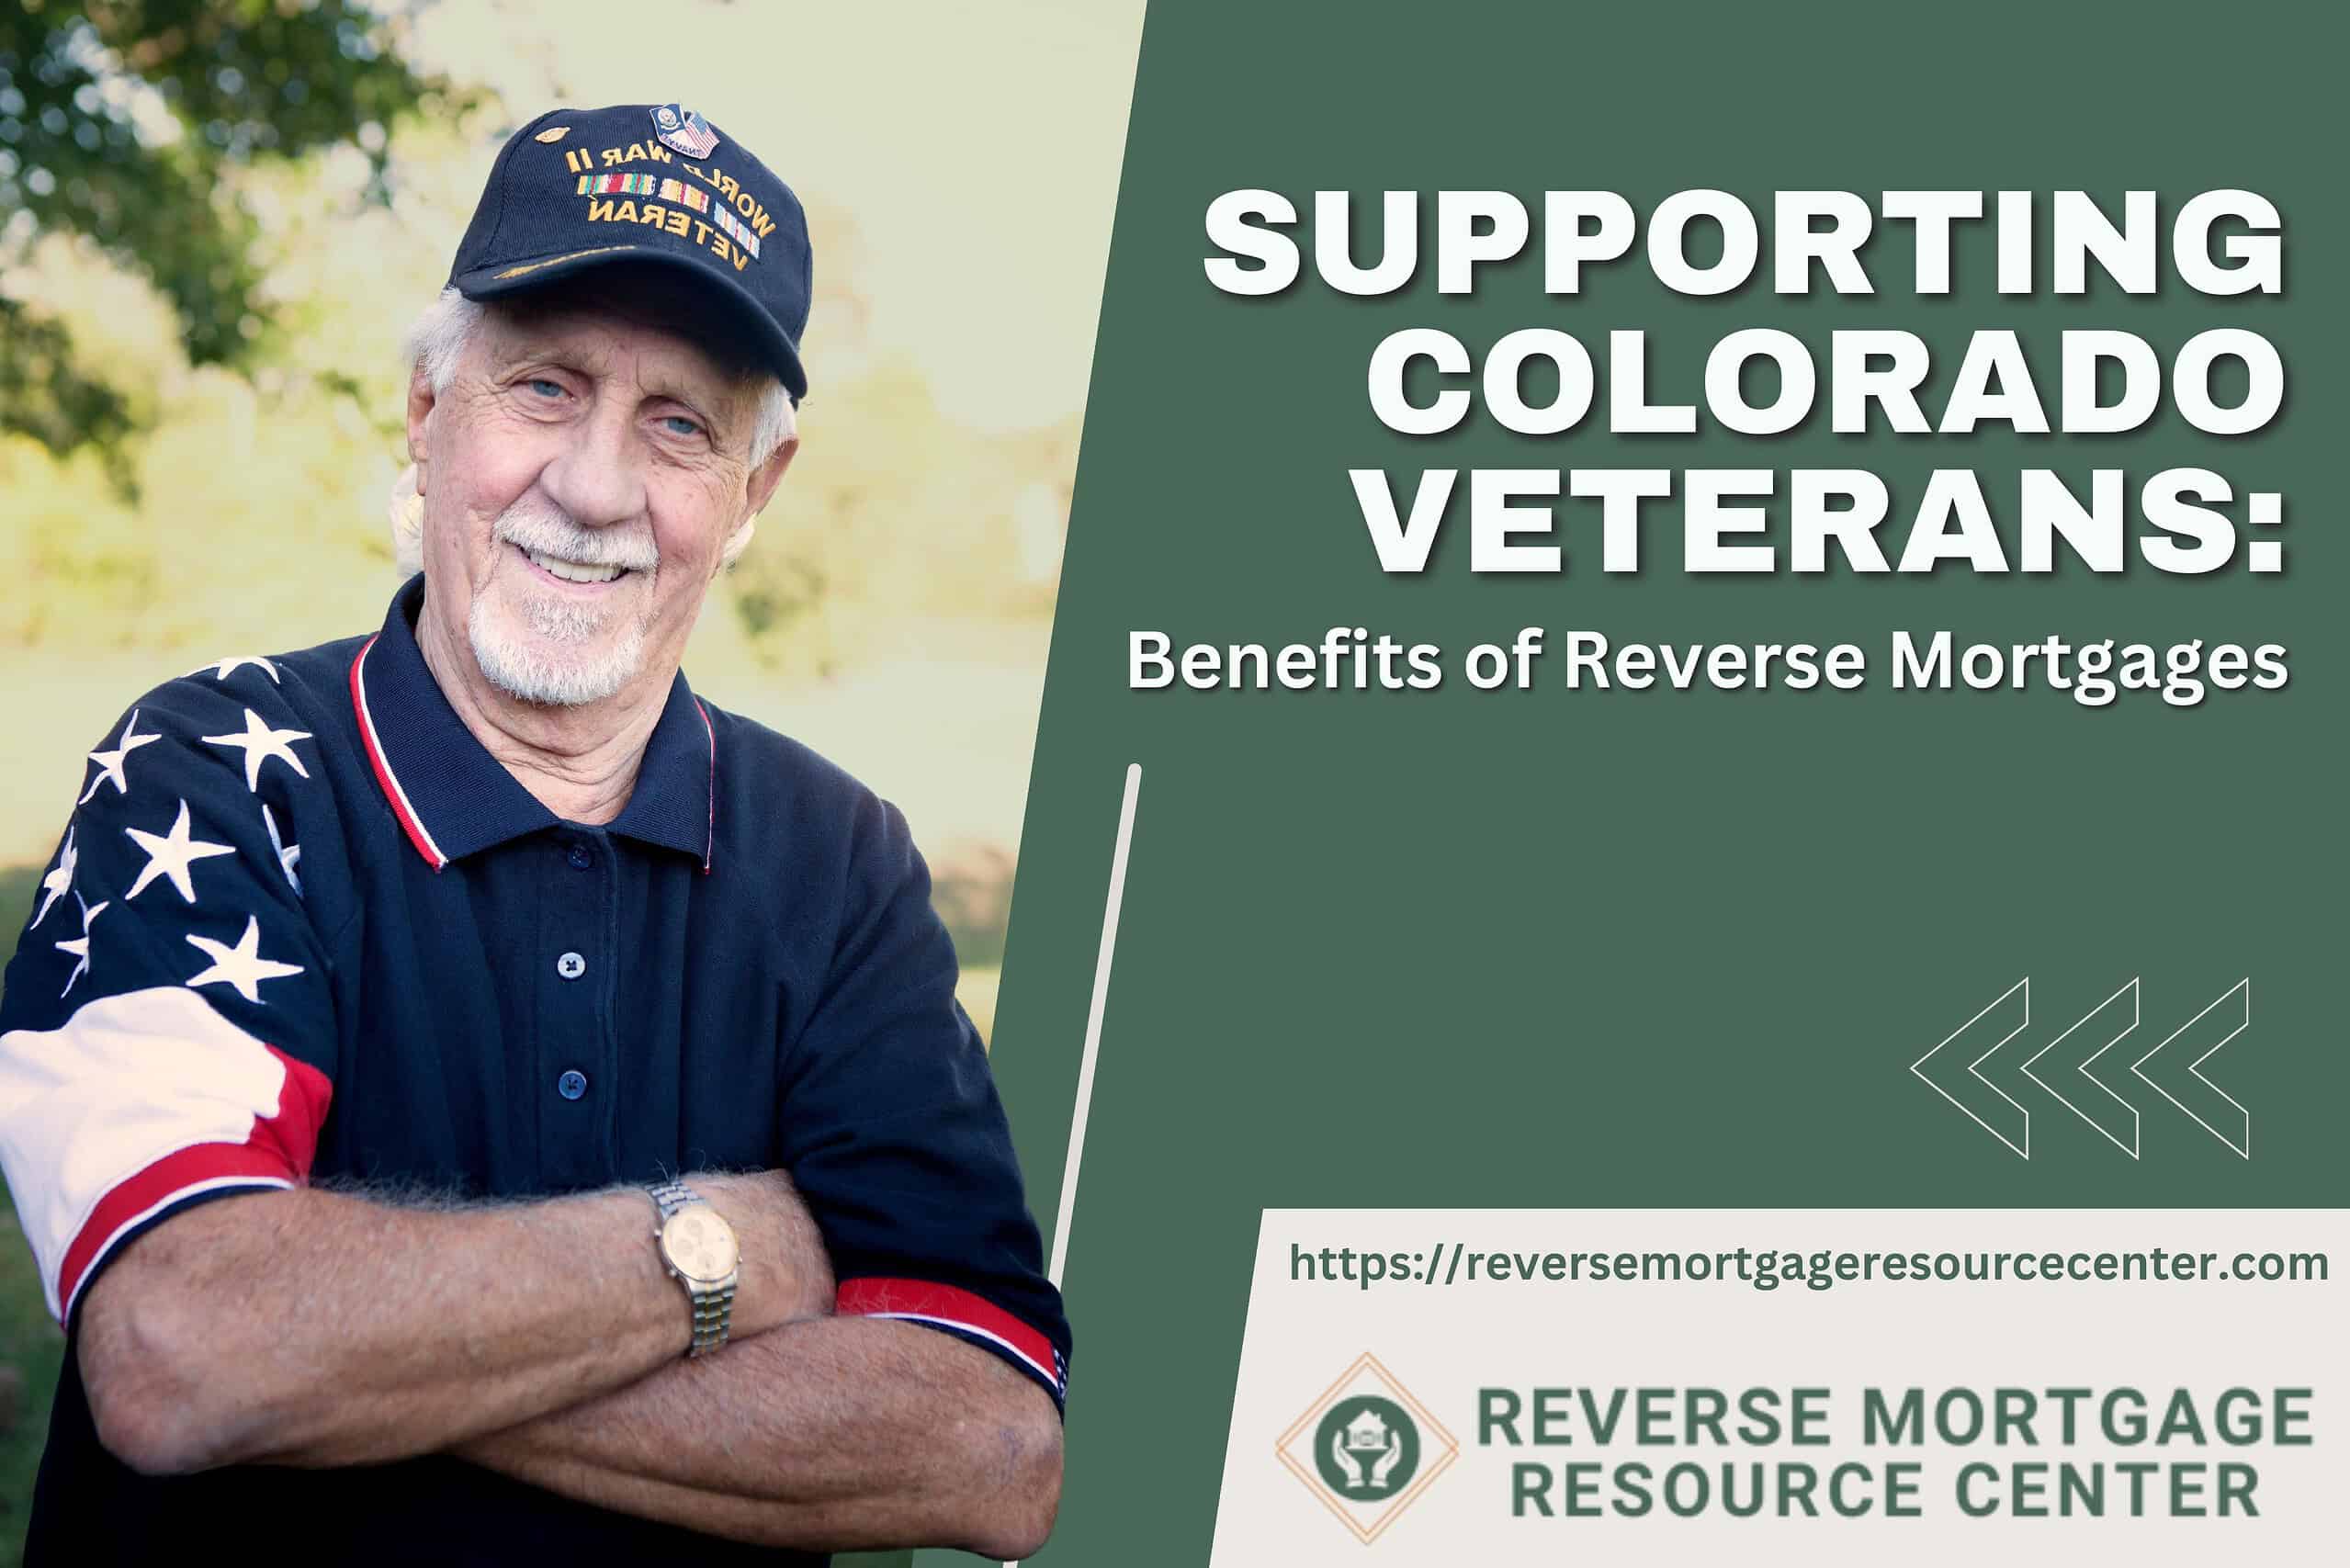 Supporting Colorado Veterans: Benefits of Reverse Mortgages